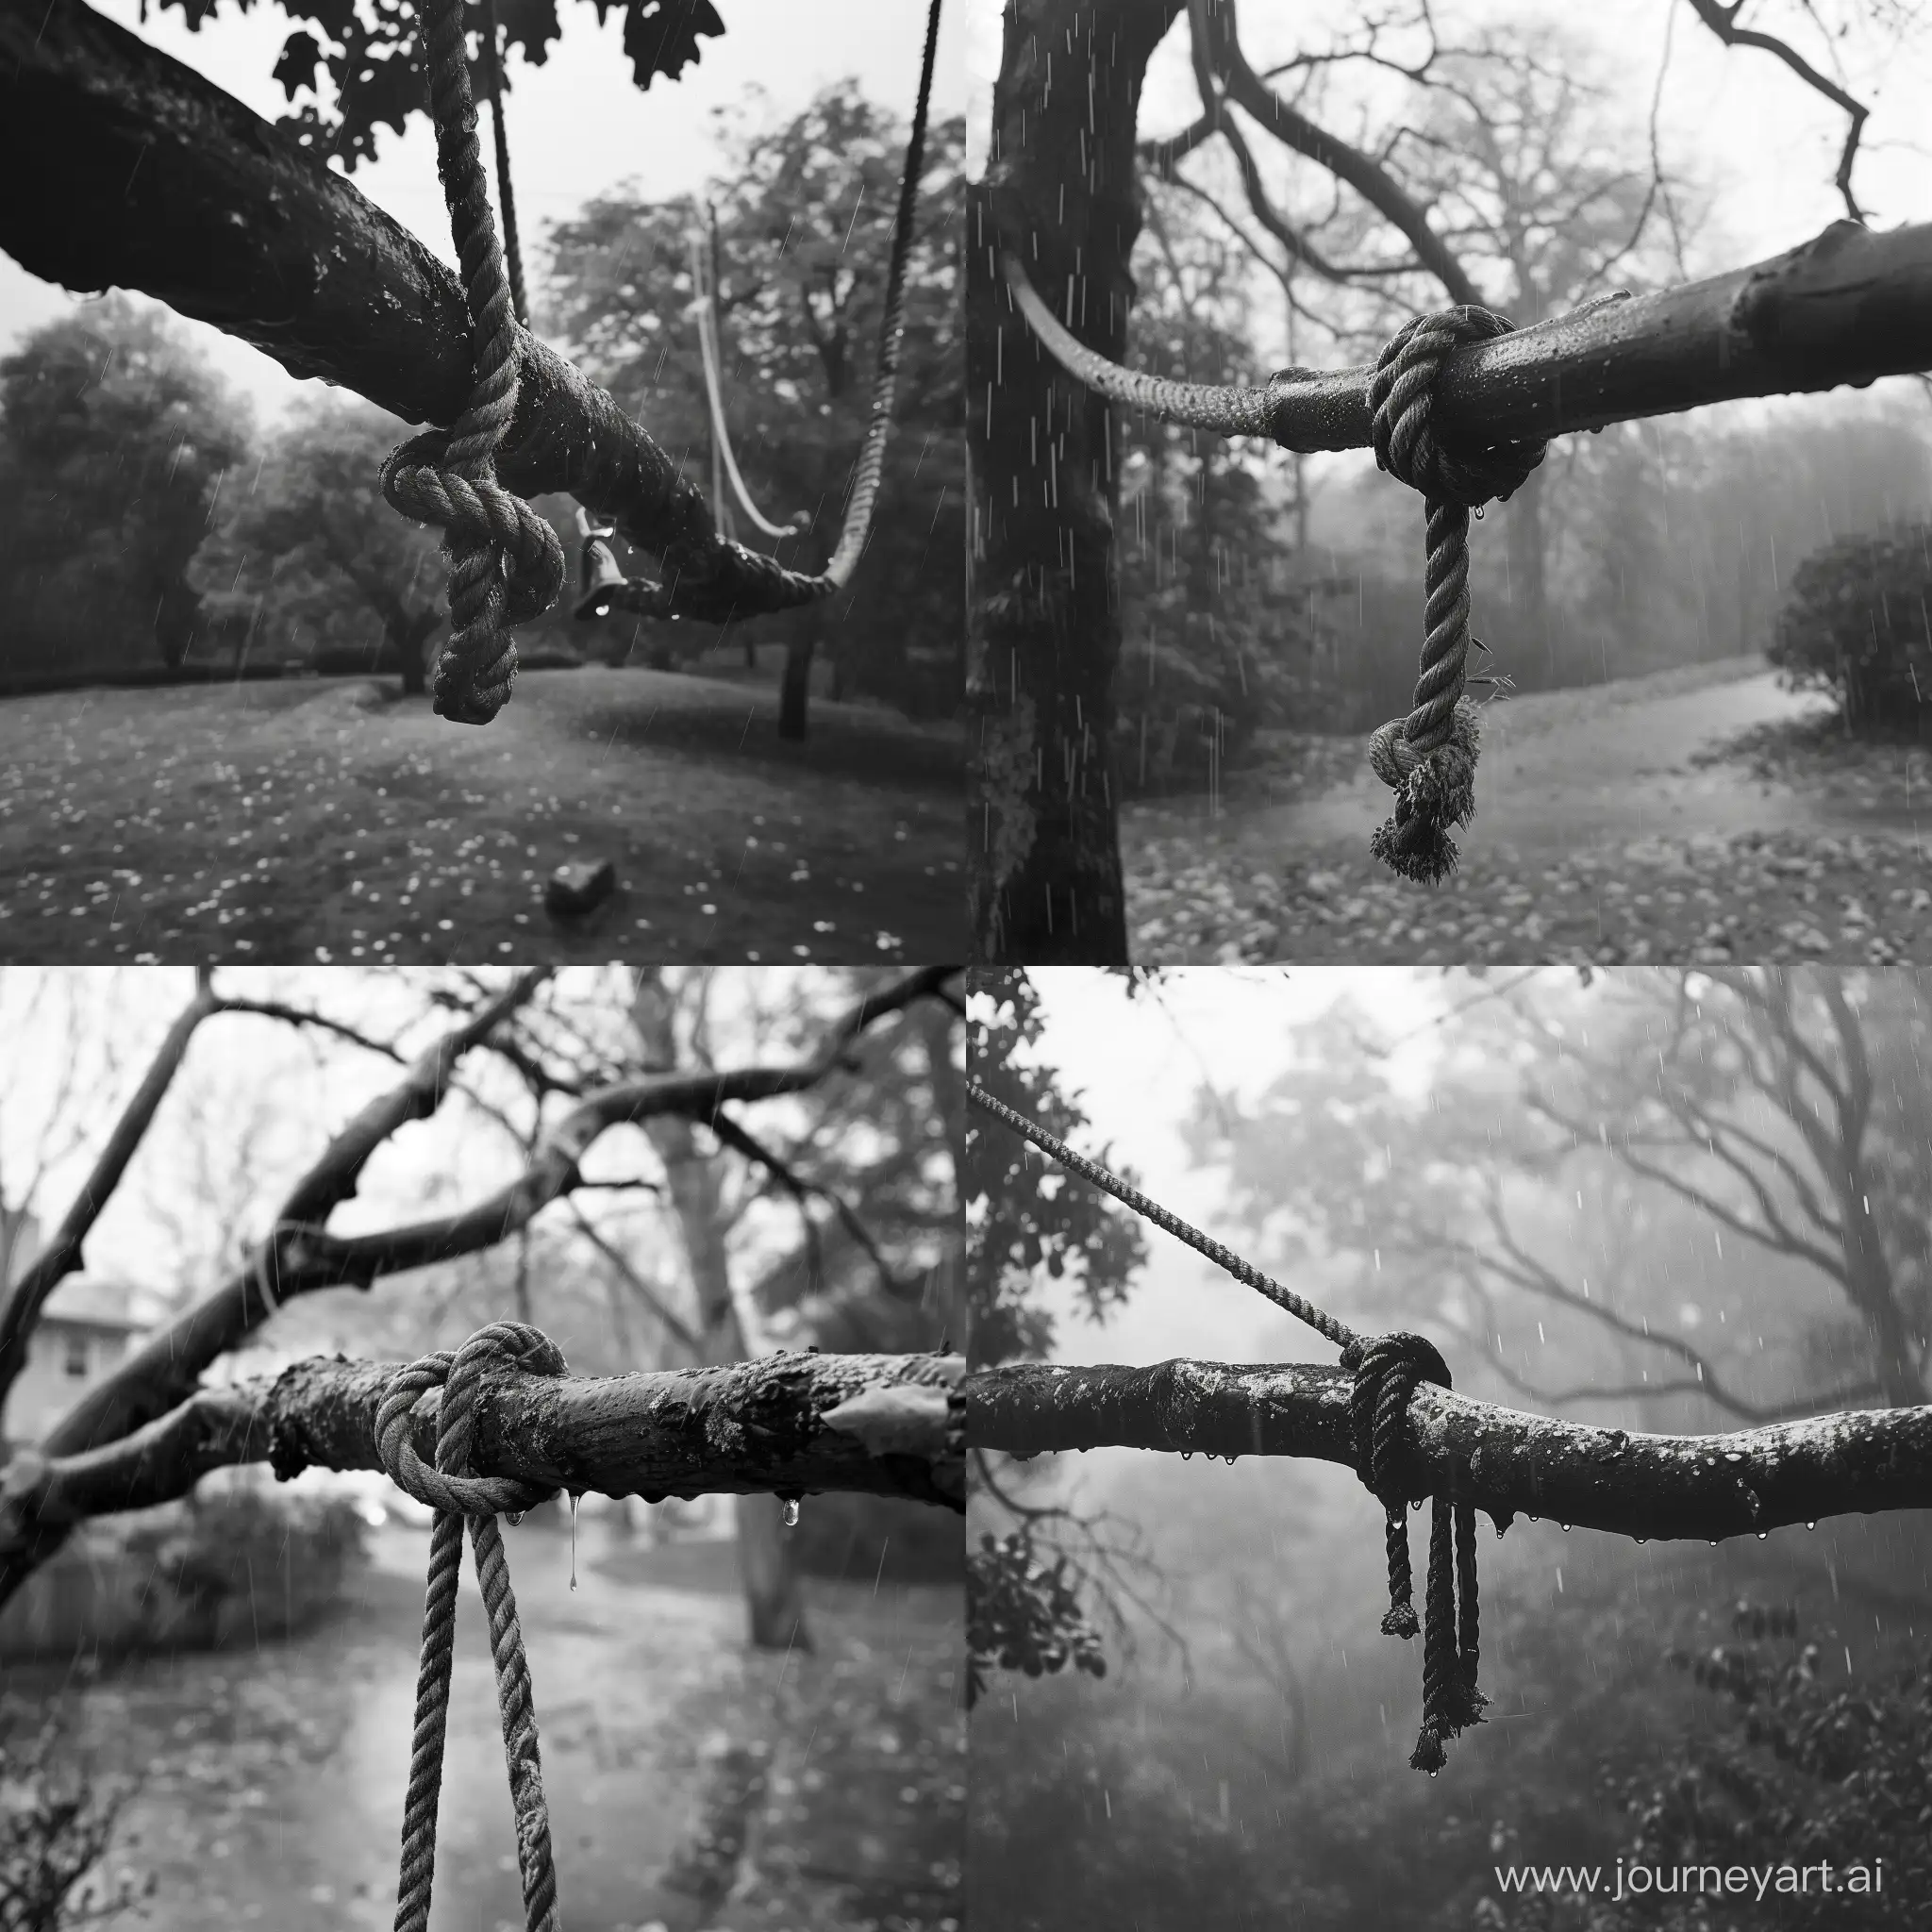 Rainy-Autumn-Scene-Desolate-Tree-with-Rope-in-Black-and-White